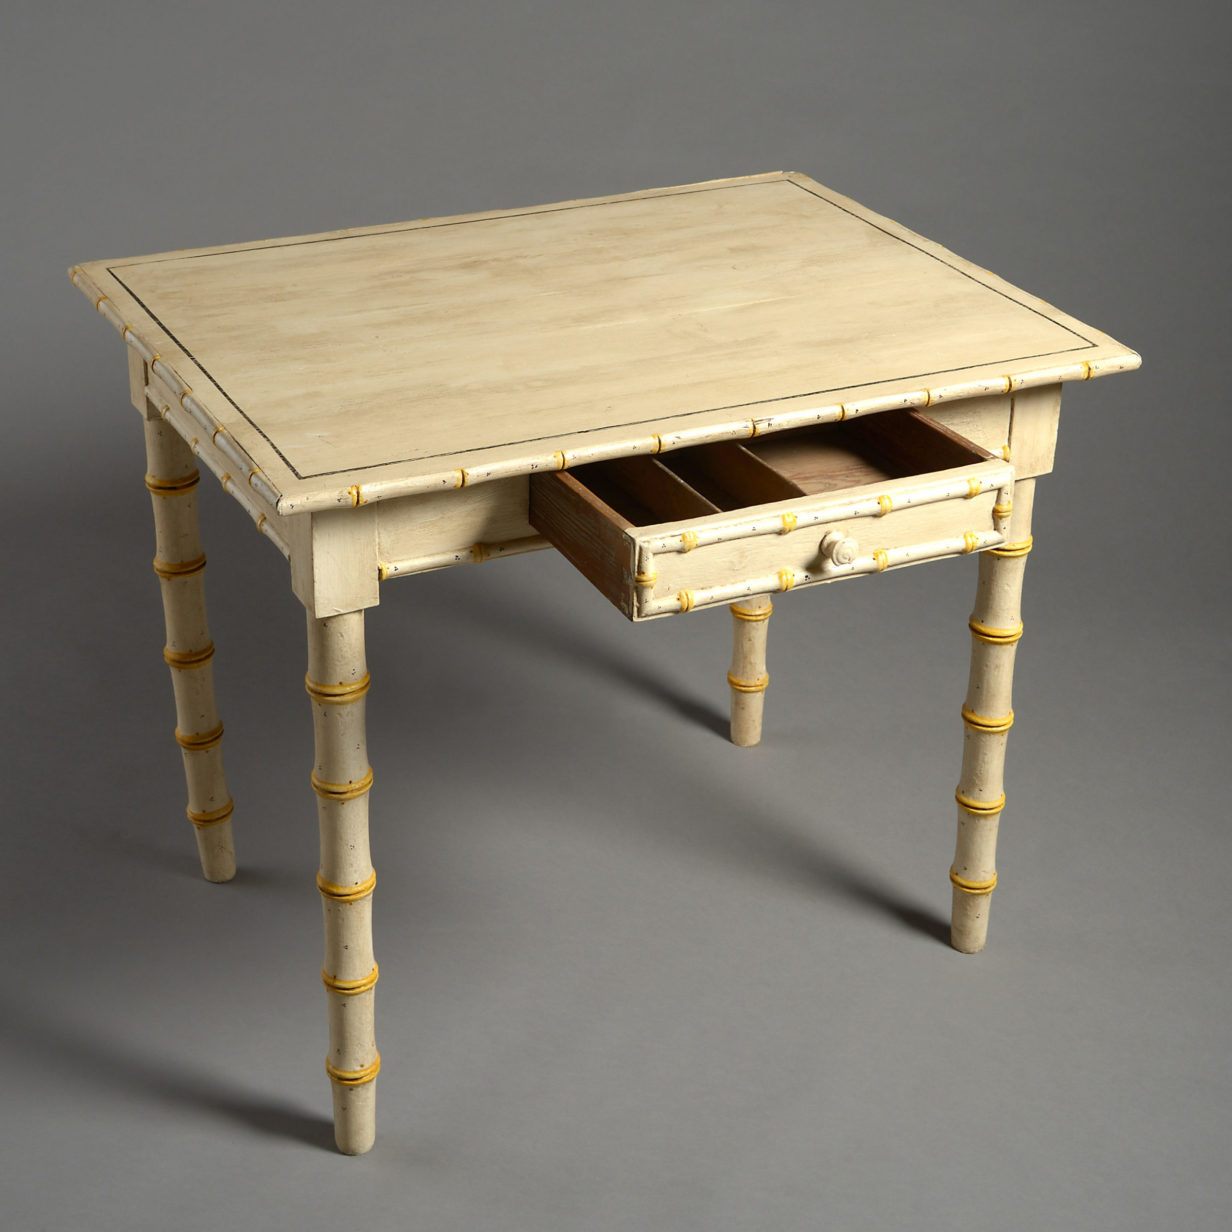 A 19th century faux bamboo side table